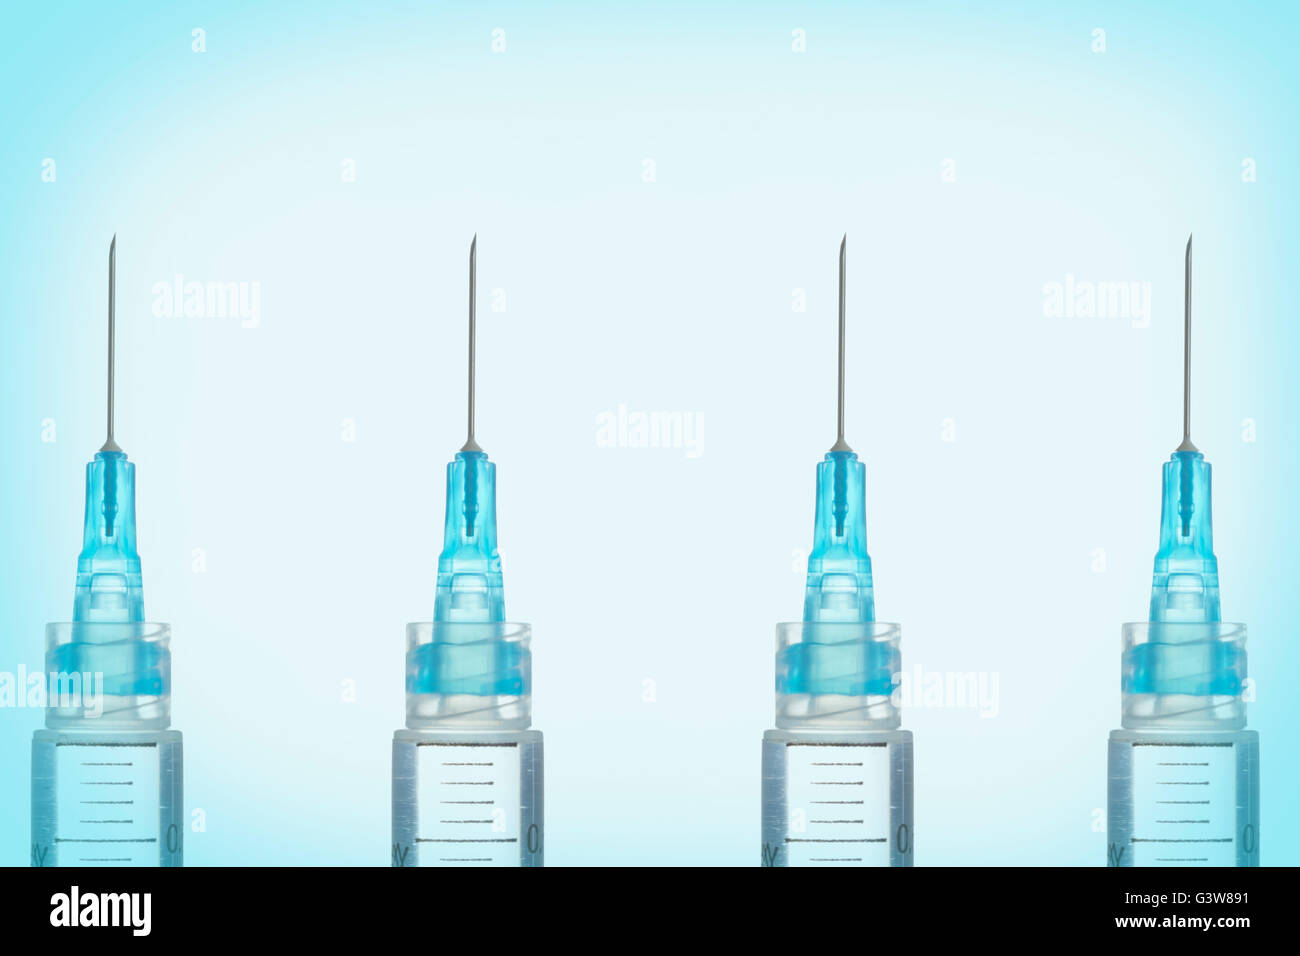 Syringes in row Stock Photo